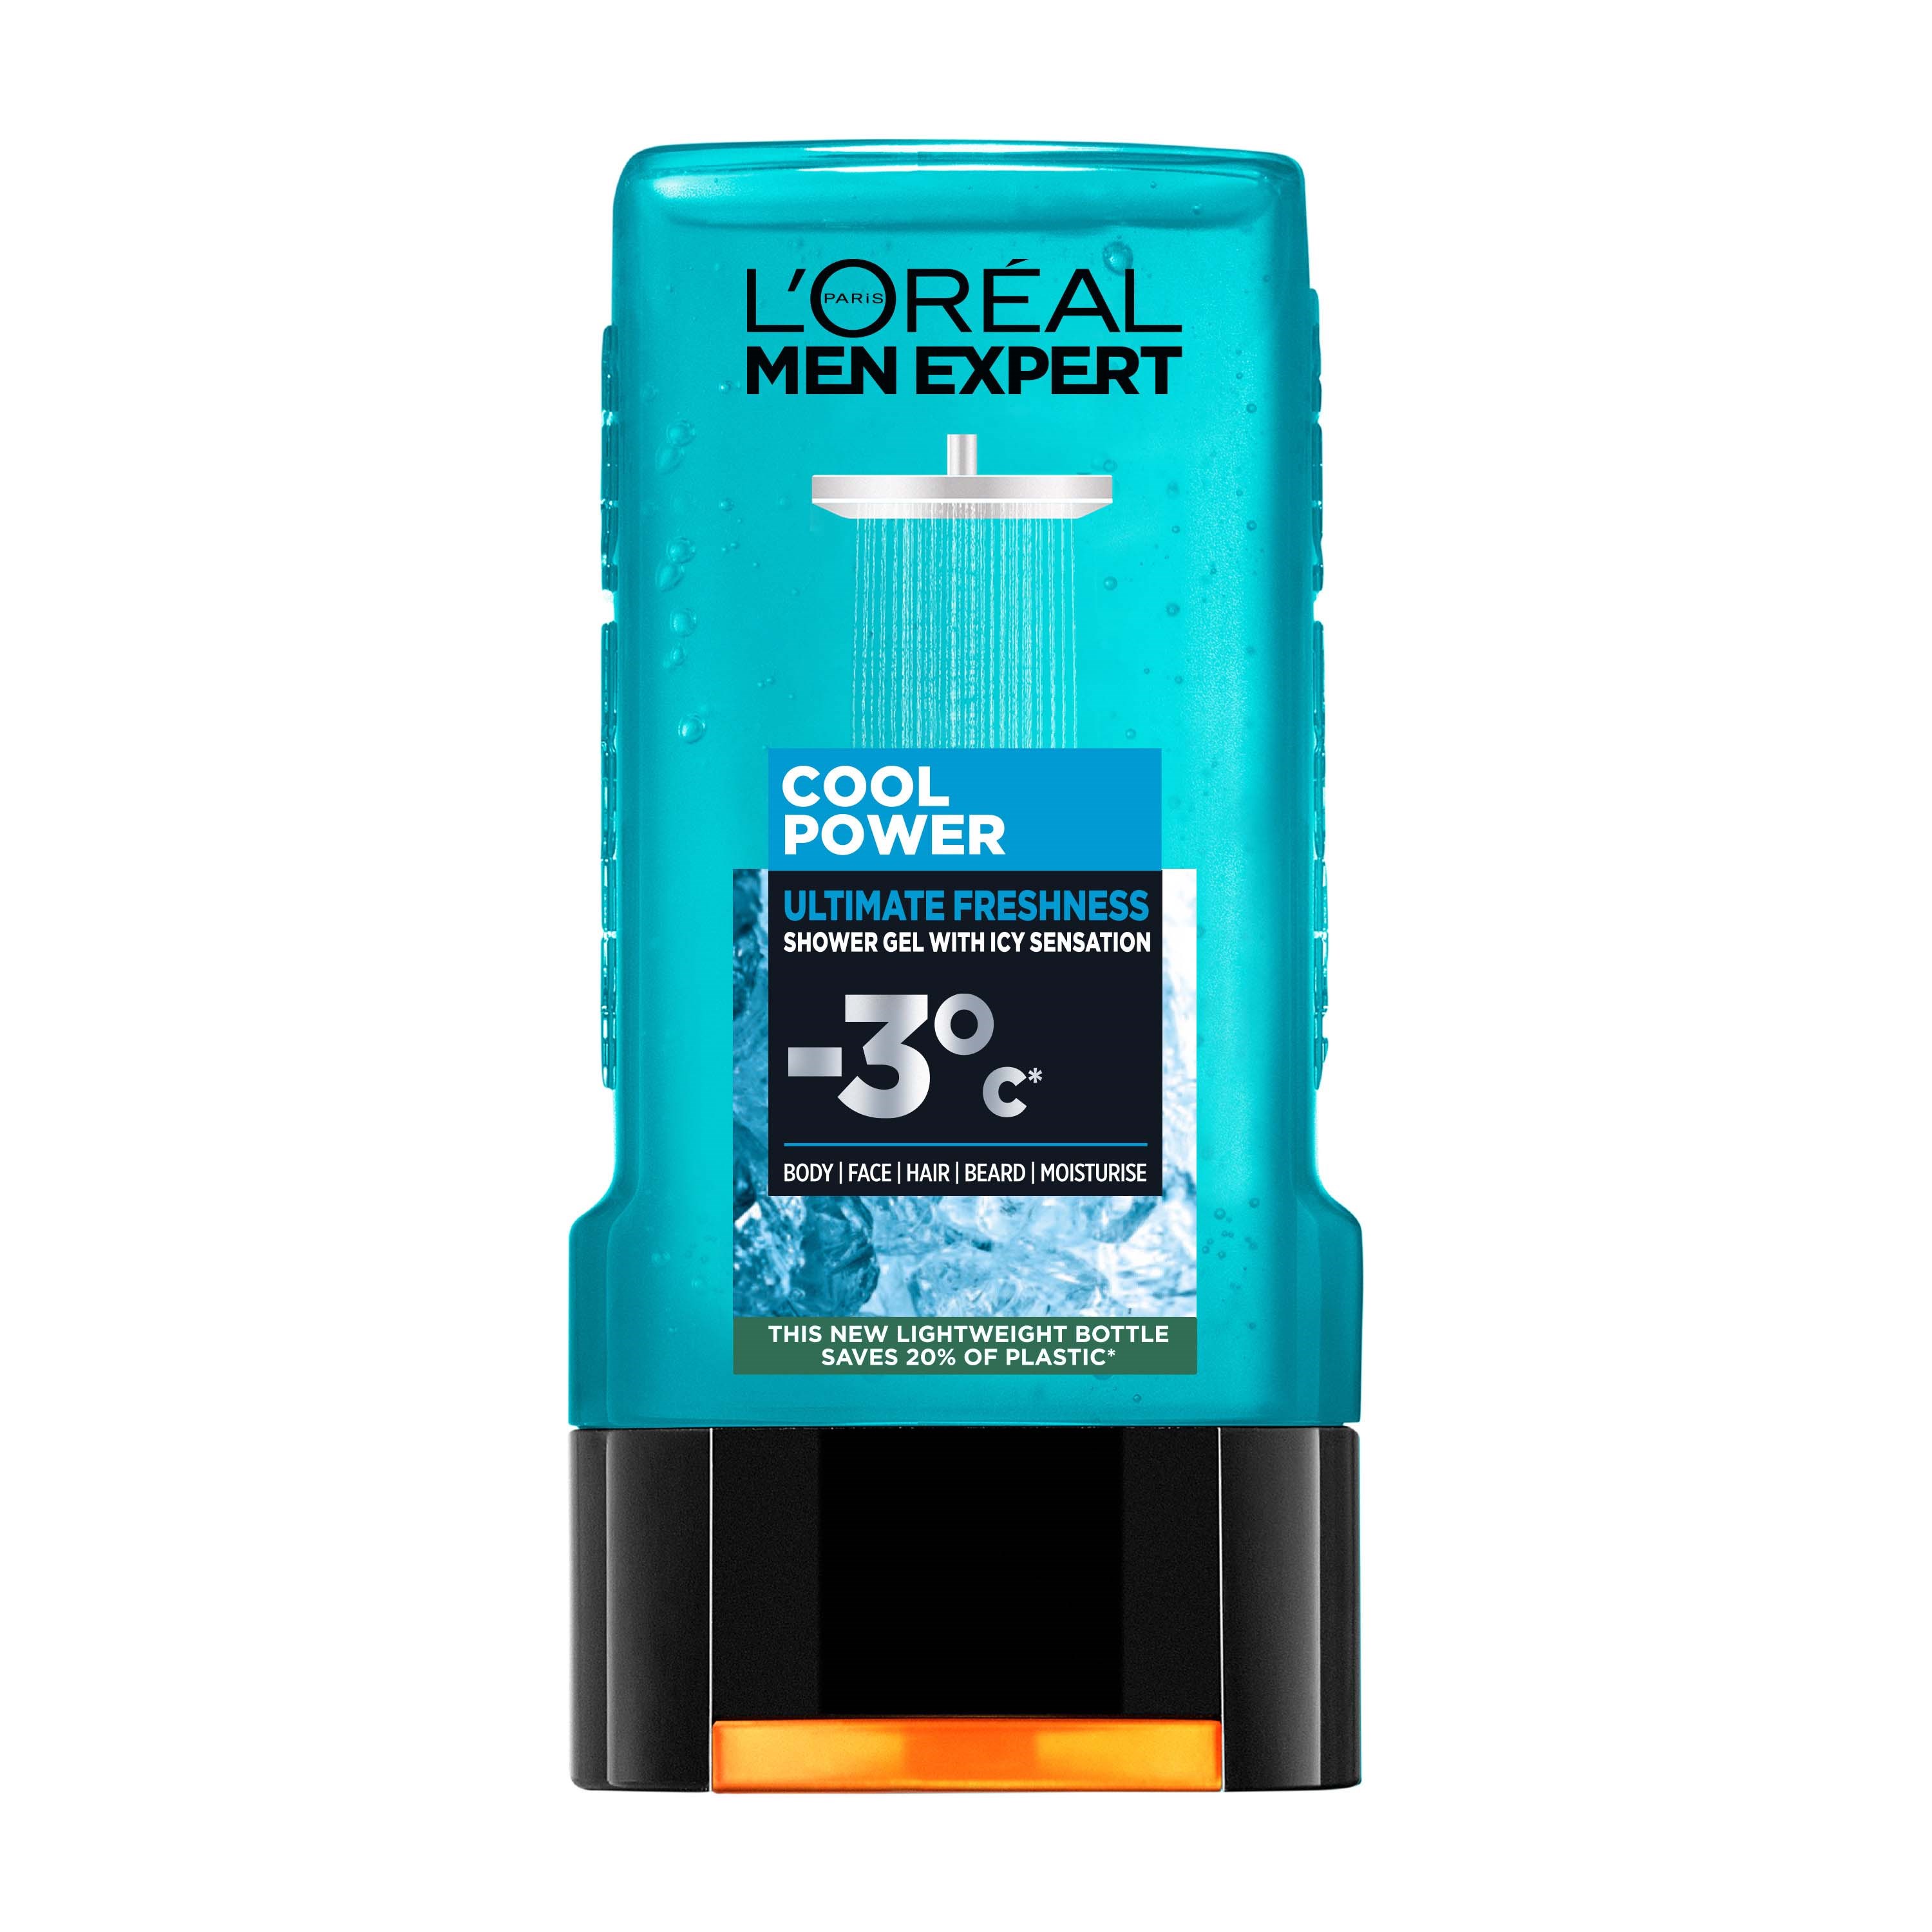 Loreal Paris Men Expert Cool Power Ultimate Freshness with Ice Technol